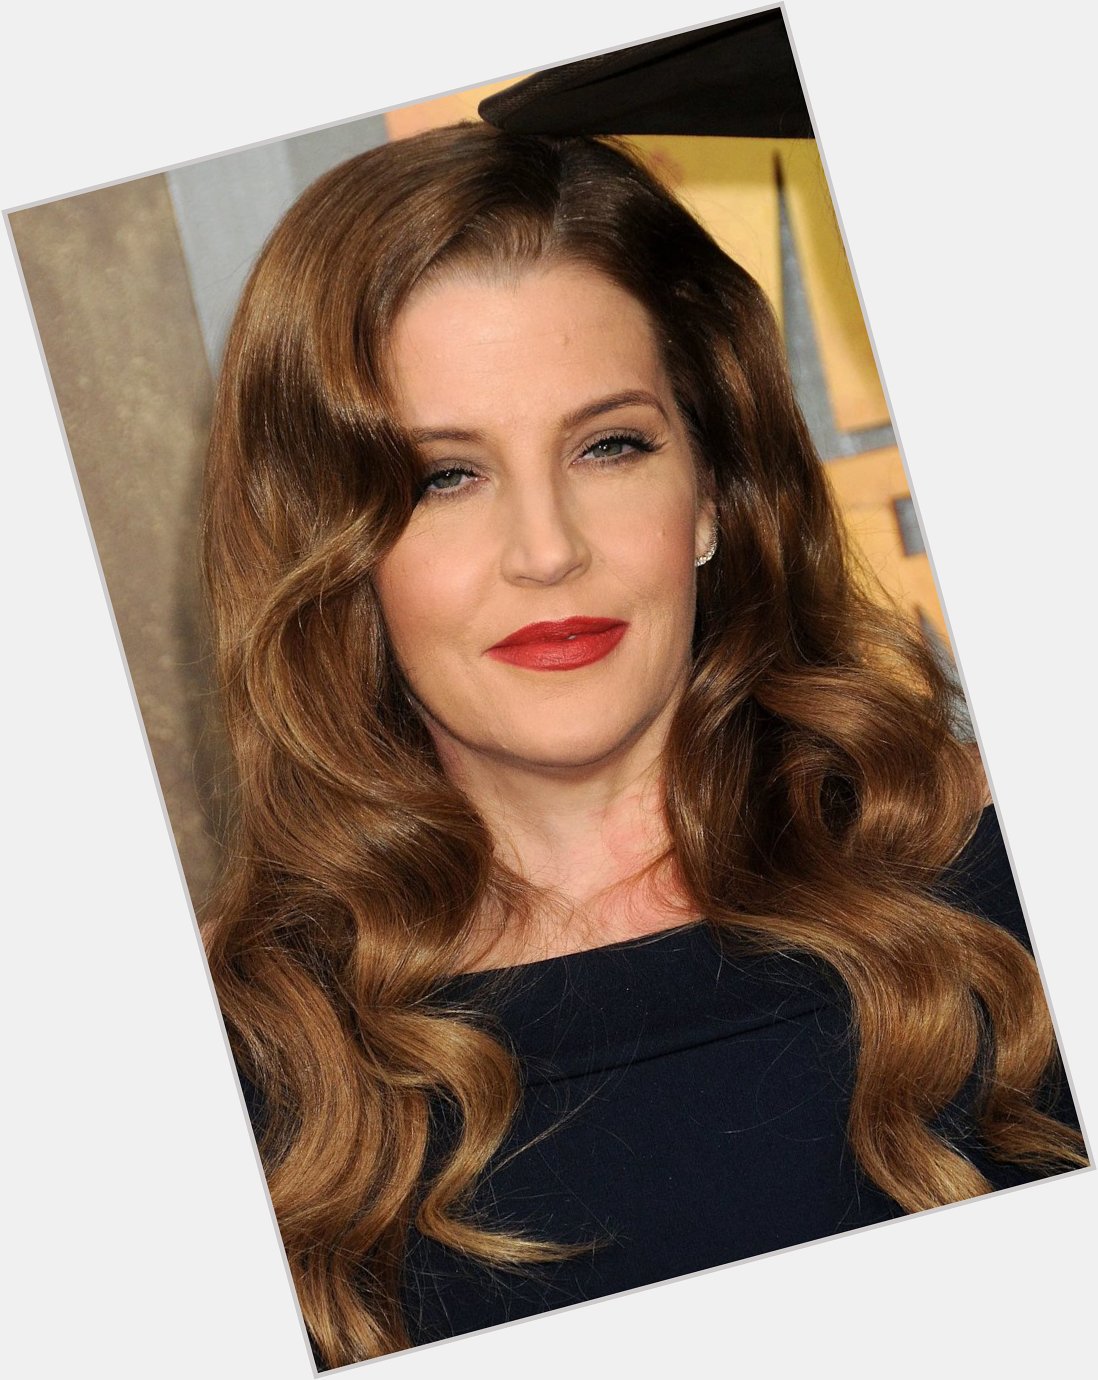 Happy Birthday to the late Lisa Marie Presley who would\ve turned 55 today. 